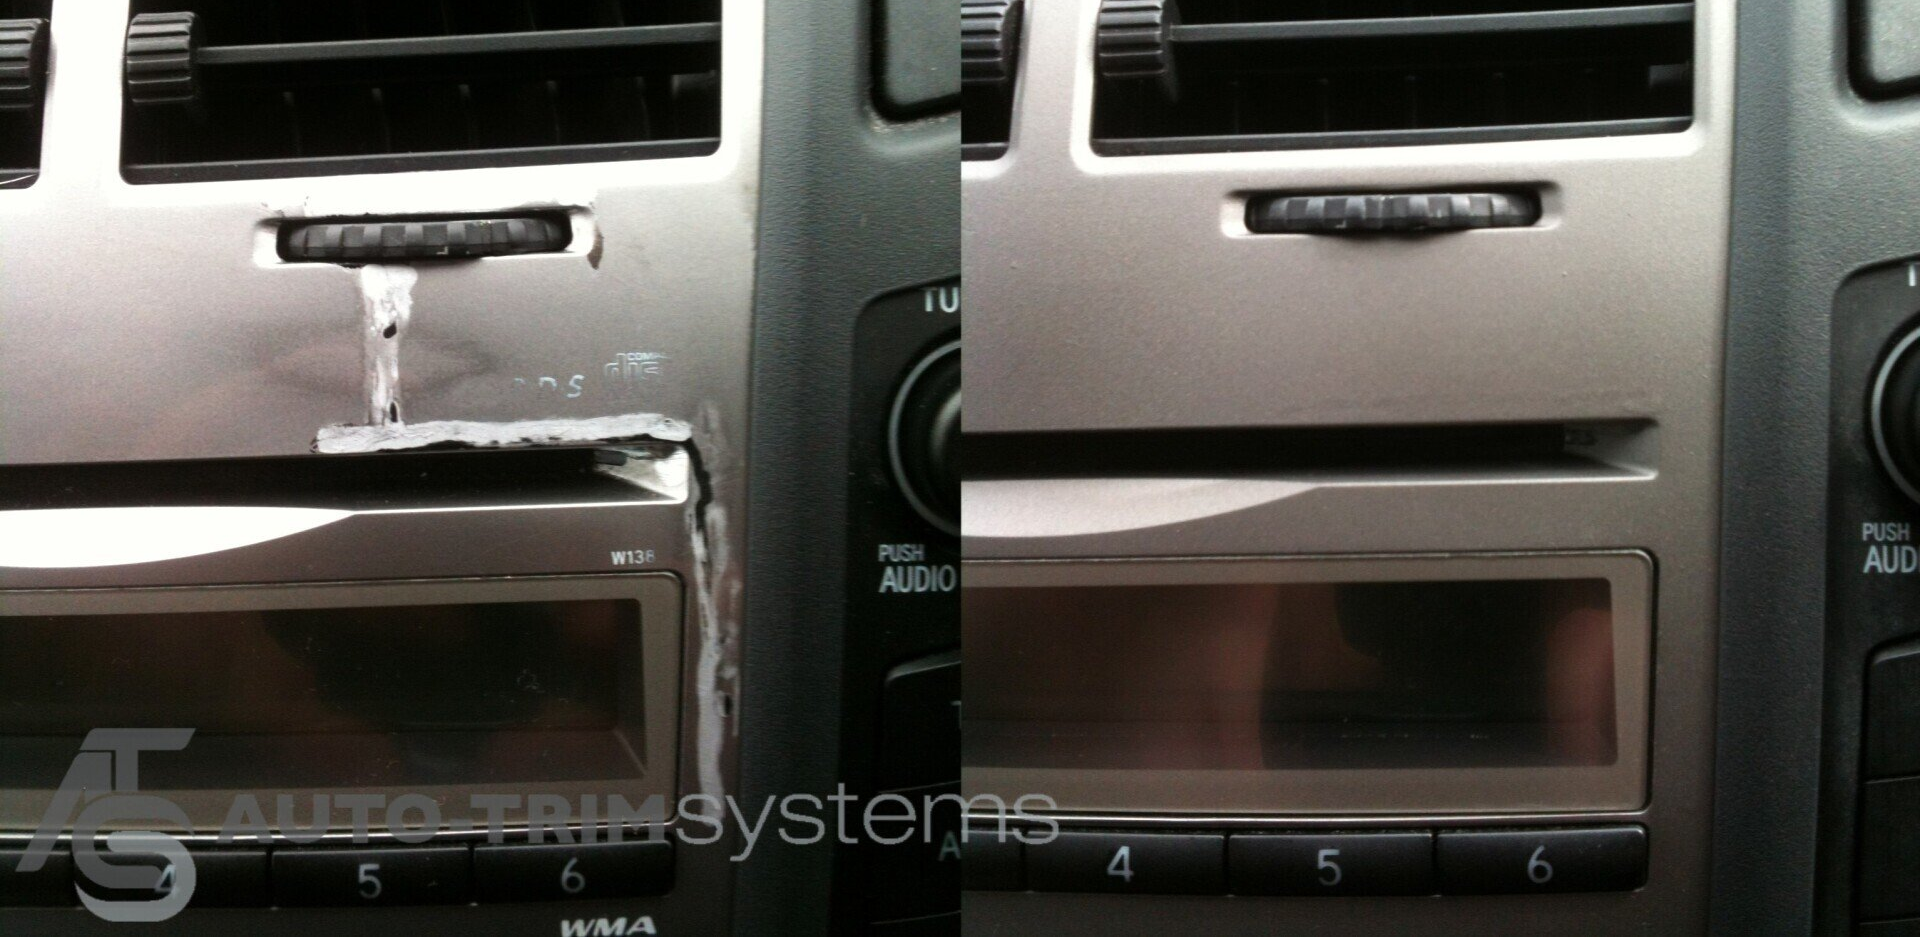 Cosmetic repair to leaked air conditioner unit on on car dashboard